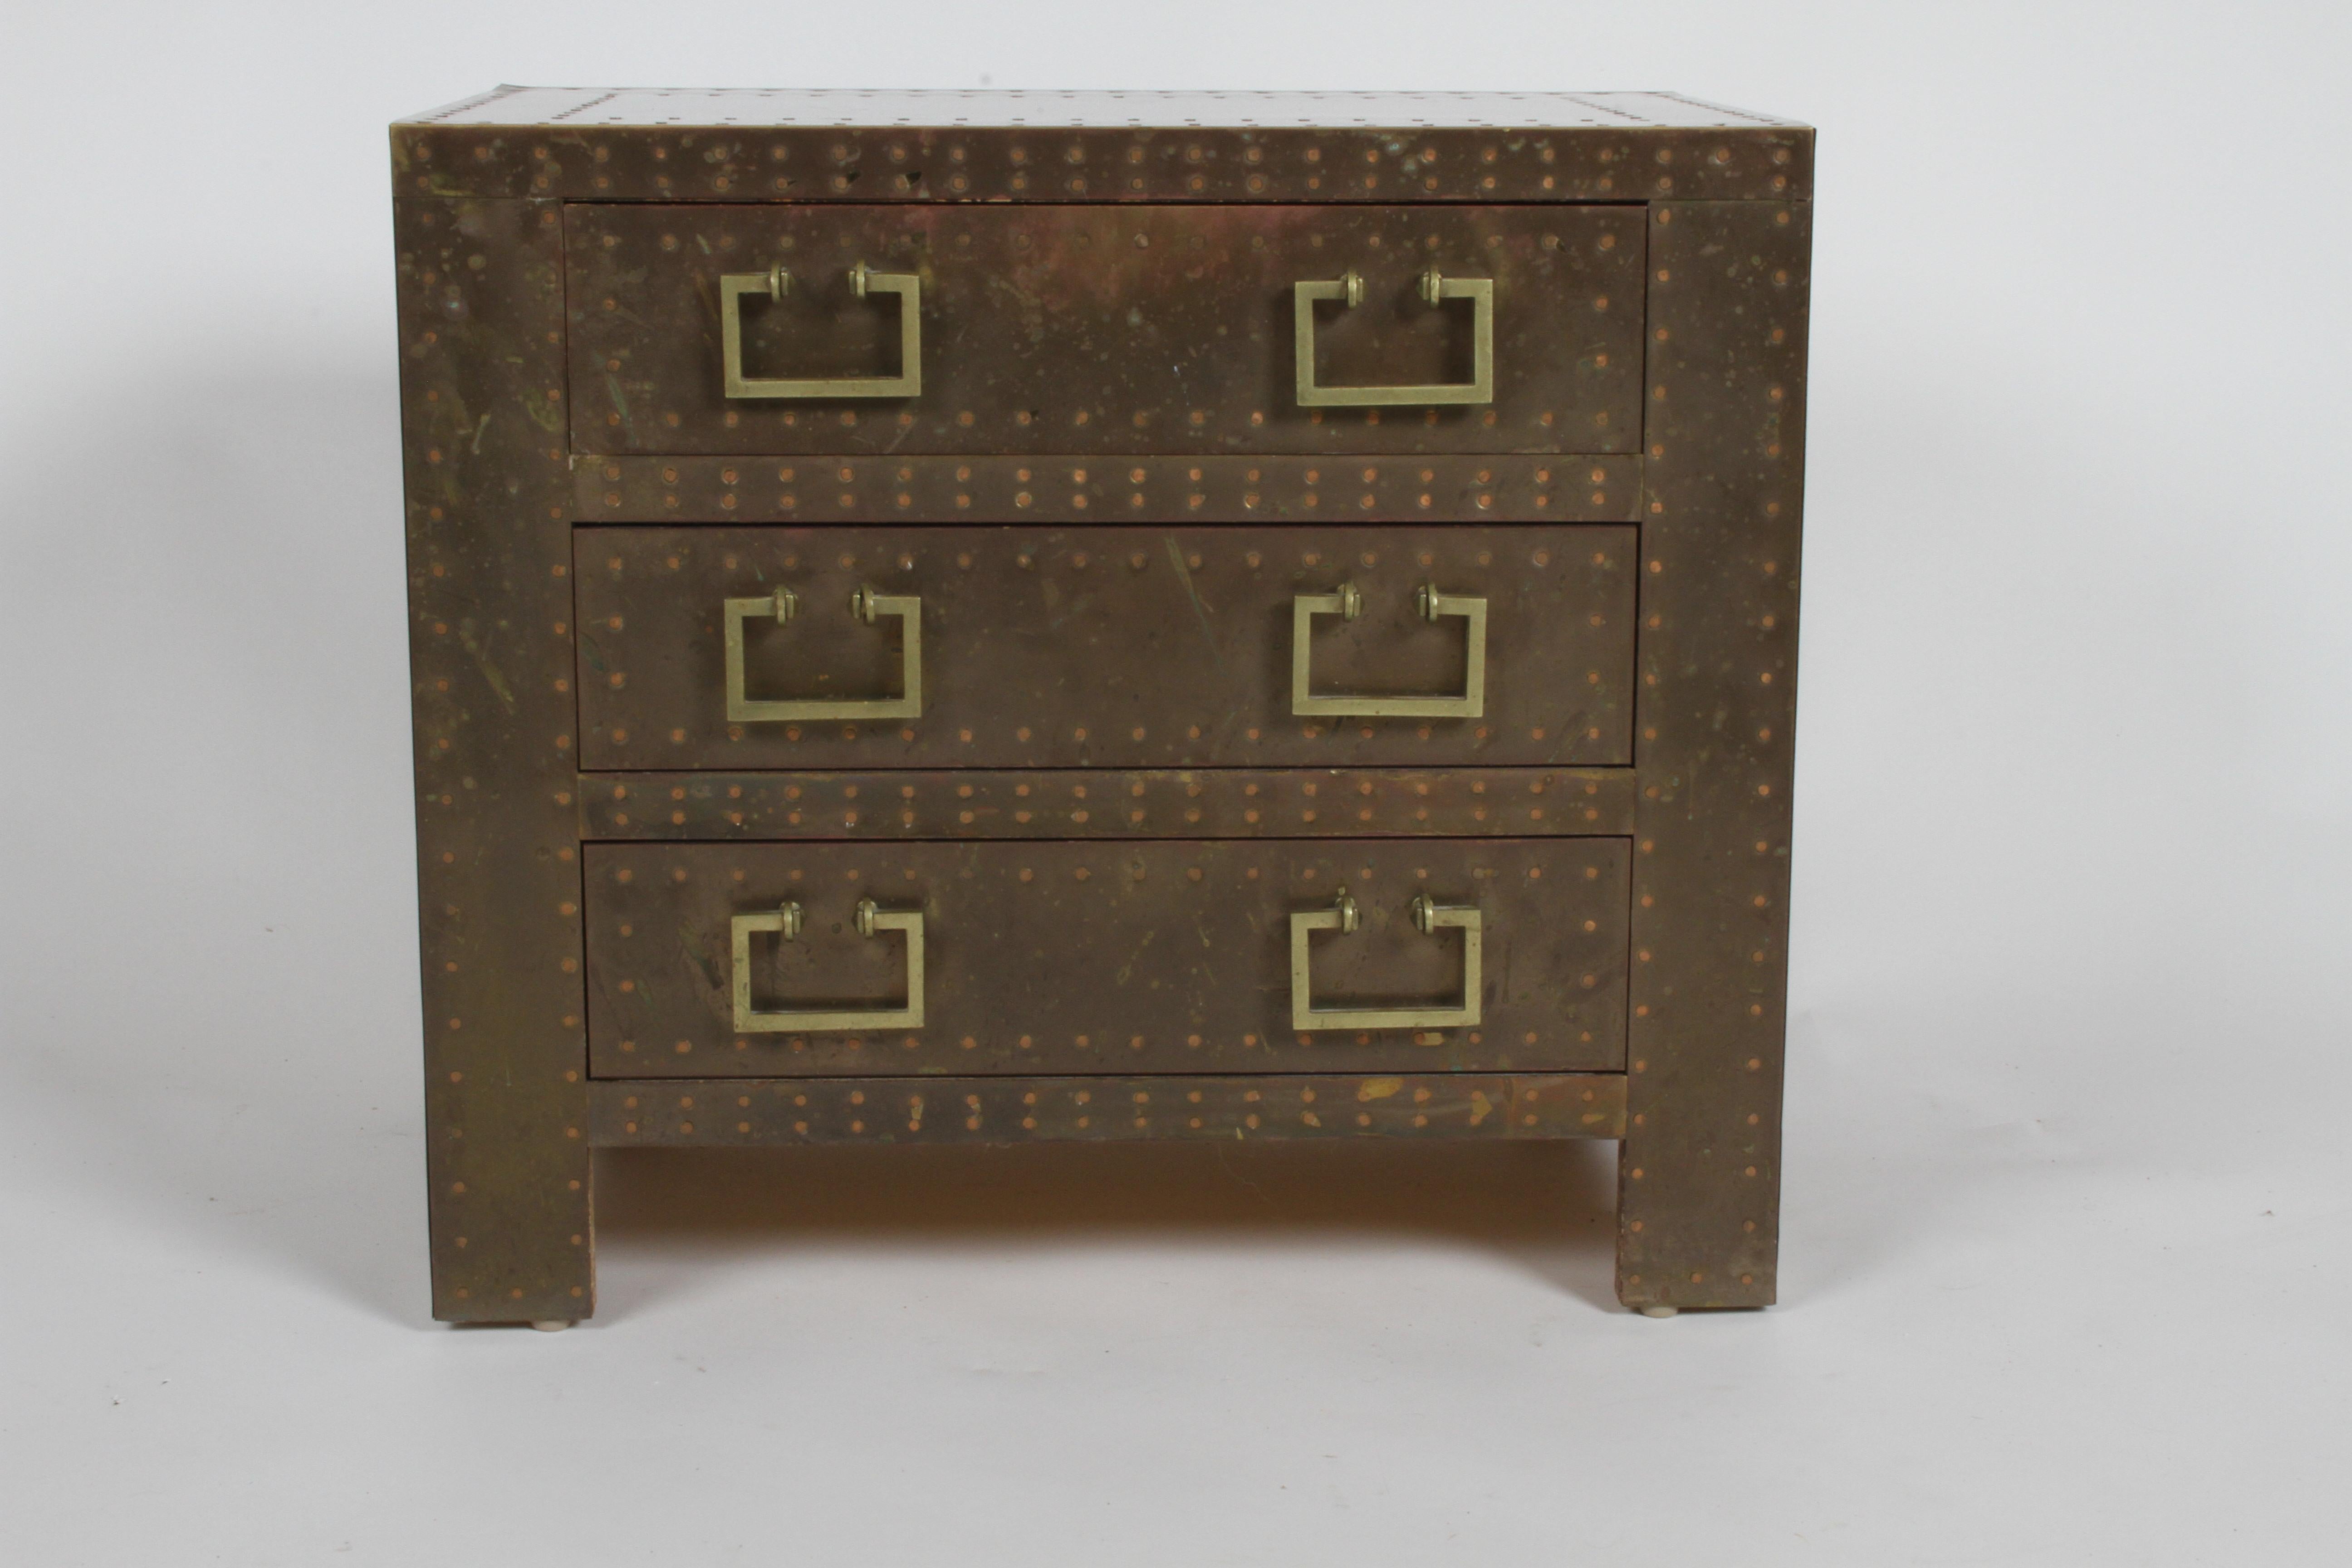 Hollywood Regency Pair of Sarreid Brass-Clad Chests Use as End Tables or Nightstands